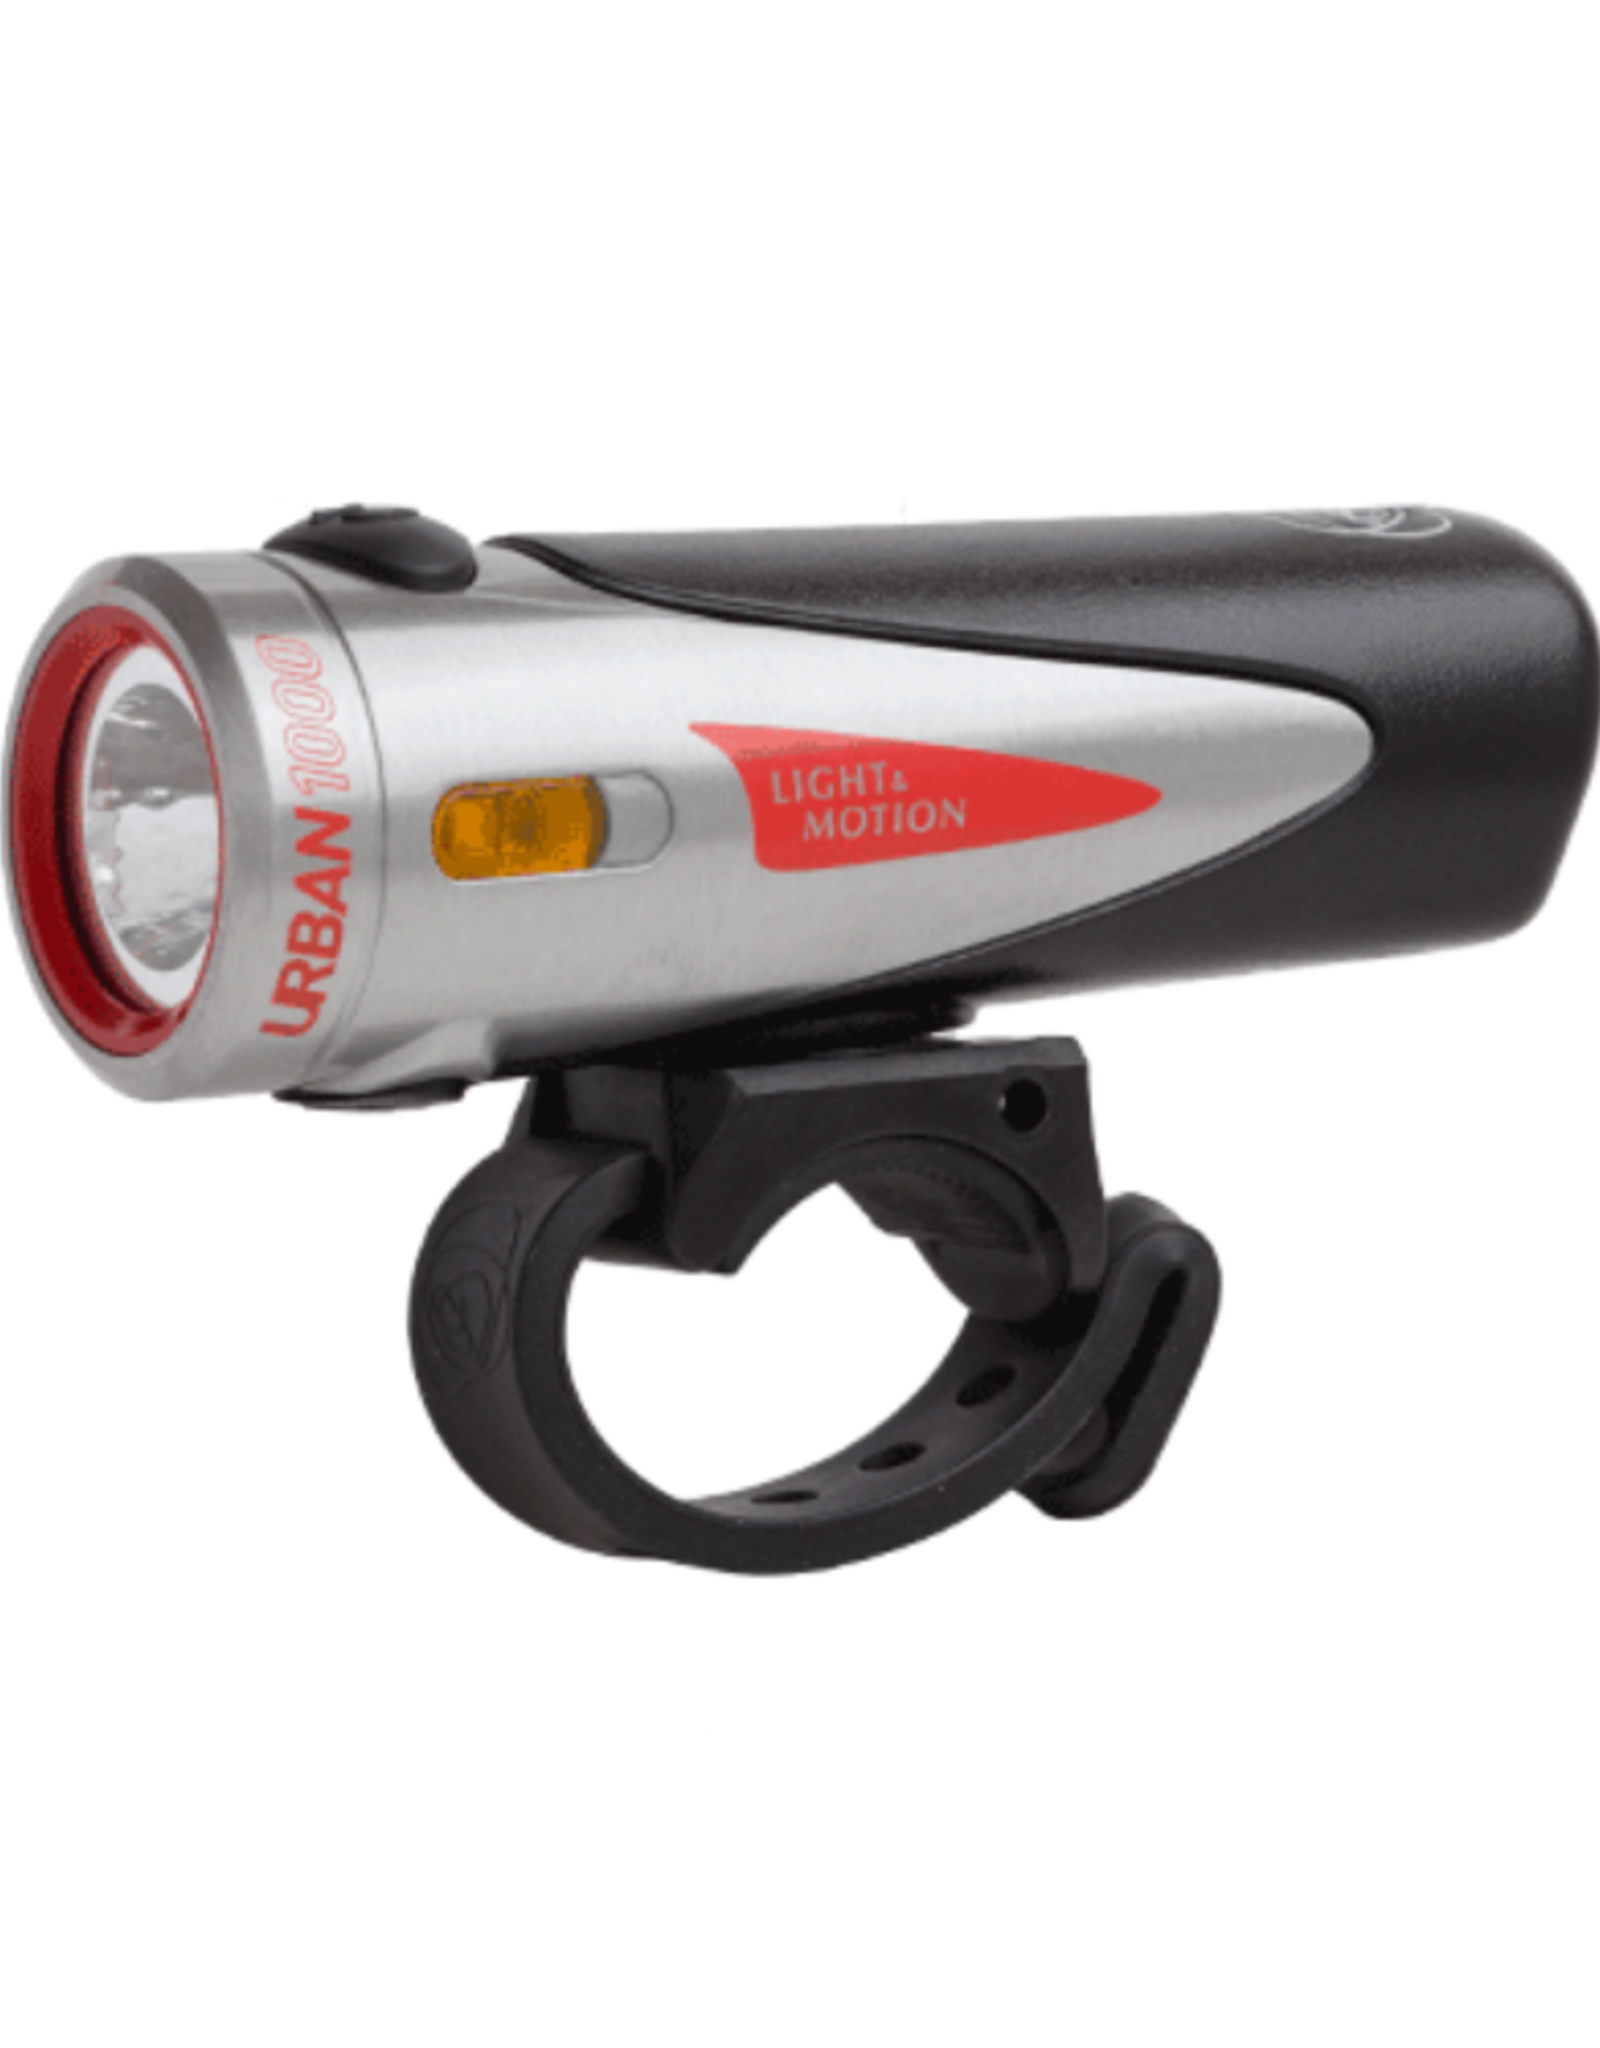 Light and Motion Light and Motion Urban 1000 Rechargeable Headlight: Ridgetop, Steel and Black